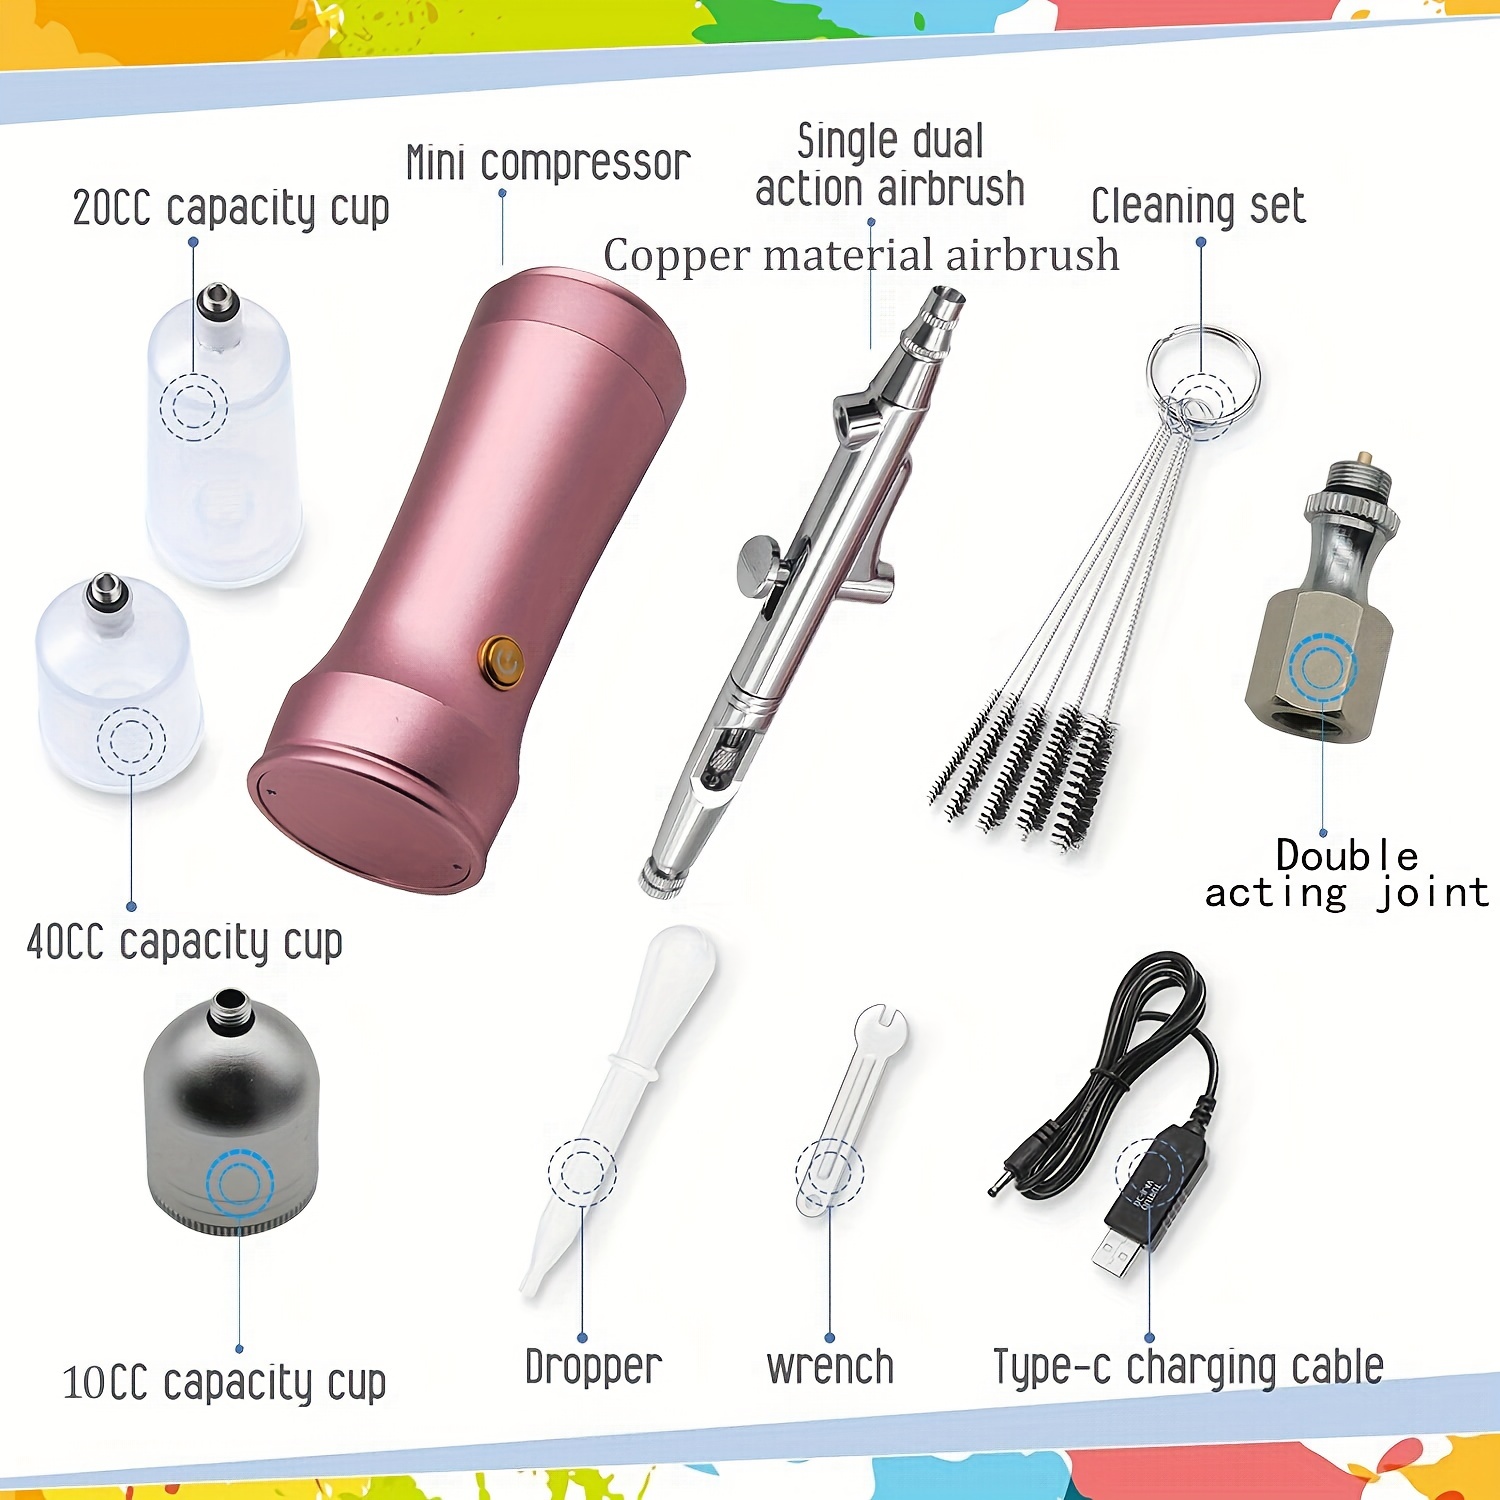  TIQTAK Cake Airbrush Kit with Compressor Cordless